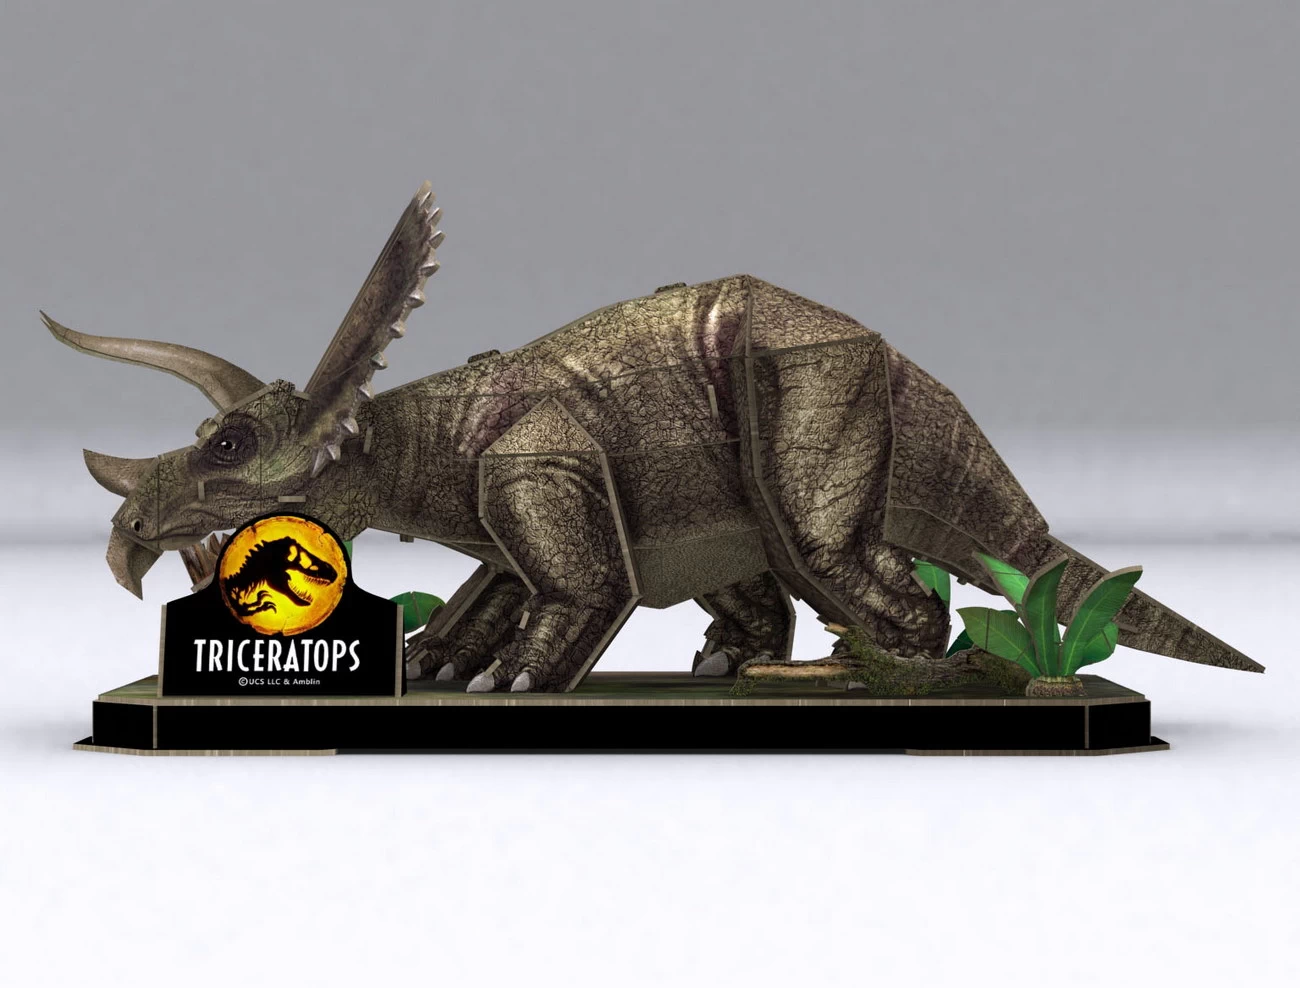 Revell 00242 - Jurassic World Dominion - Triceratops - 3D Puzzle